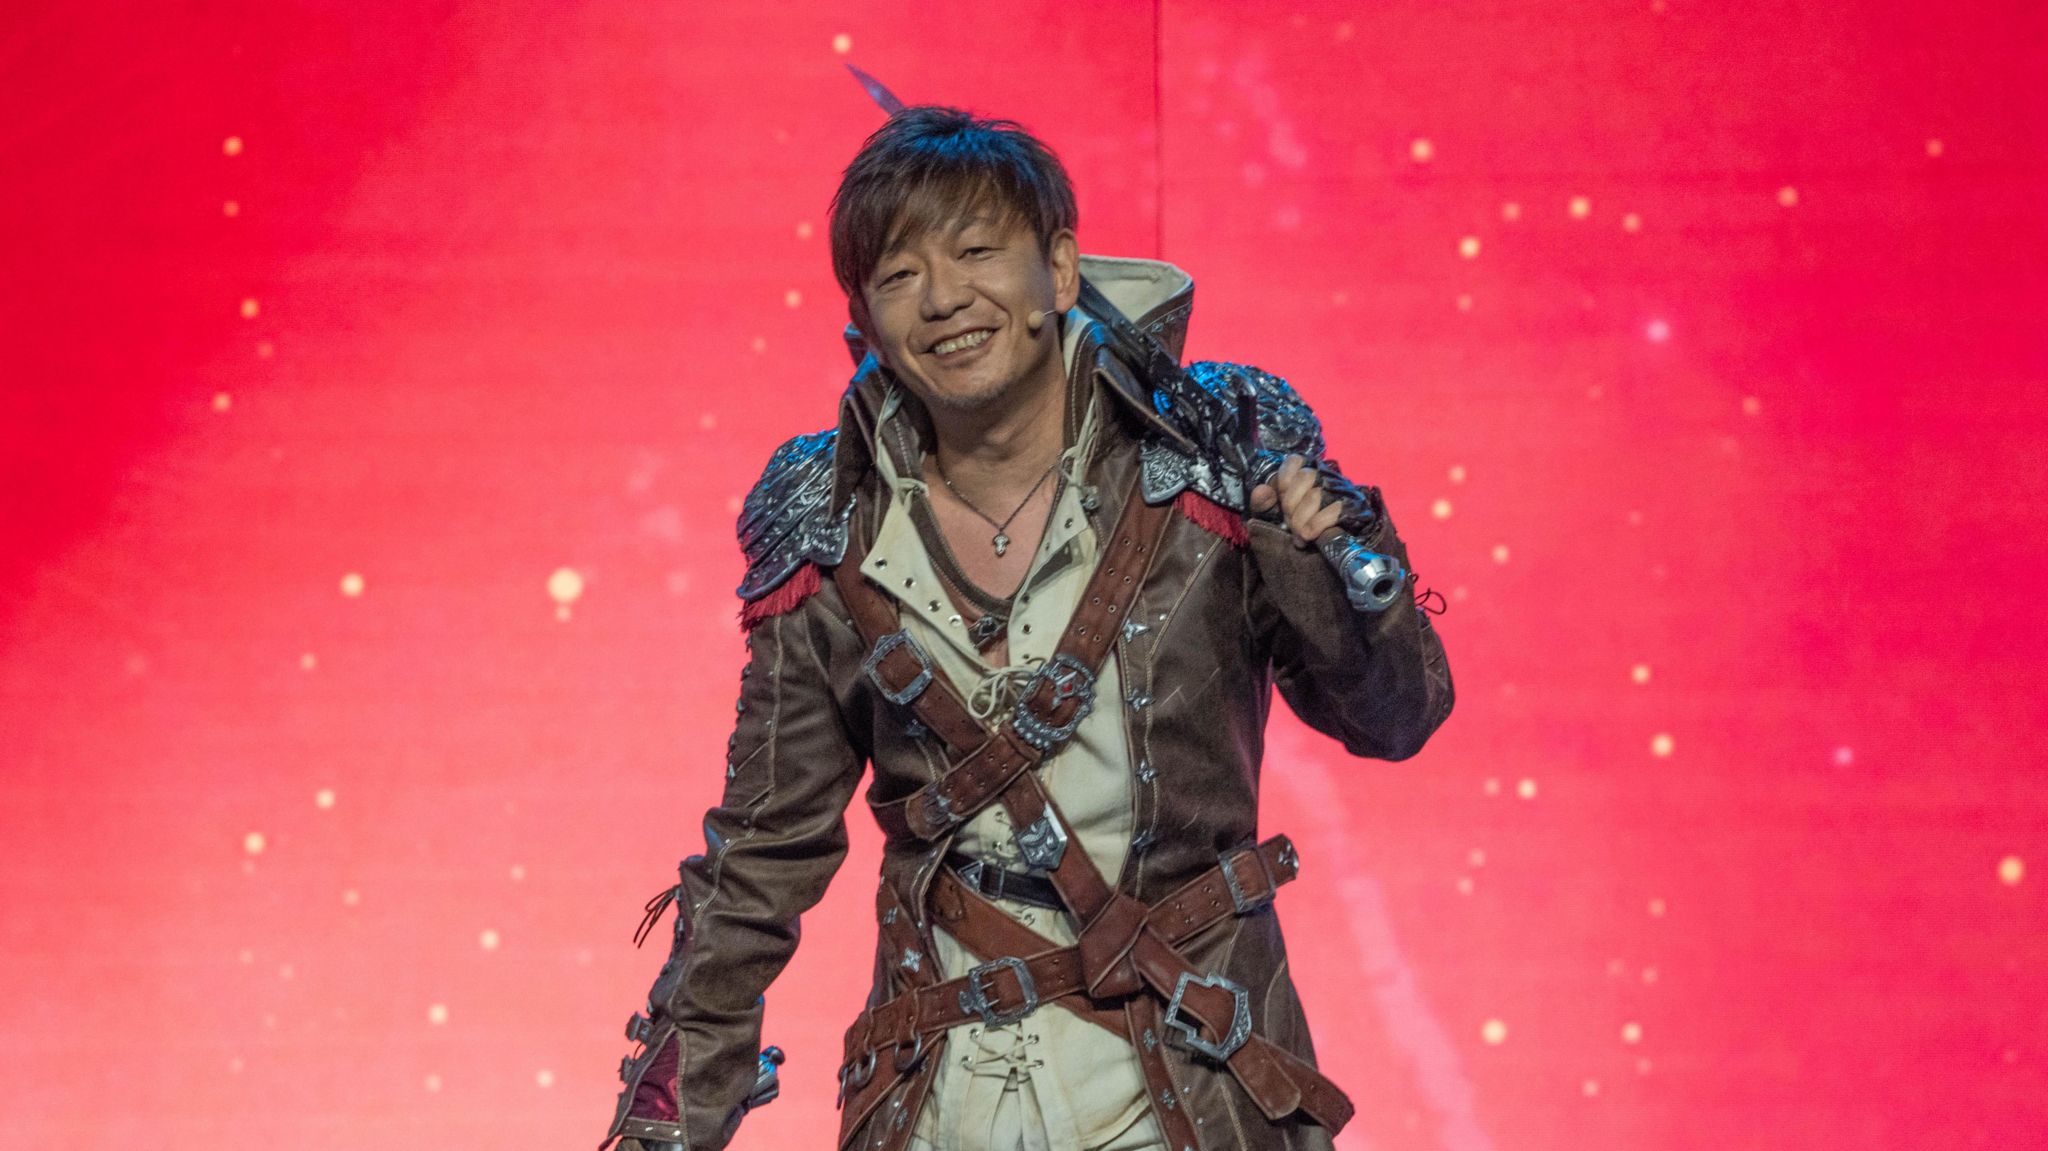 A man dressed in costume poses on a stage, smiling. He has a replica sword resting on the shoulder of his long leather jacket, which is fastened by several interlocking belts. The belts have ornate buckles that complement the intricate metal shoulder pads of the garment.